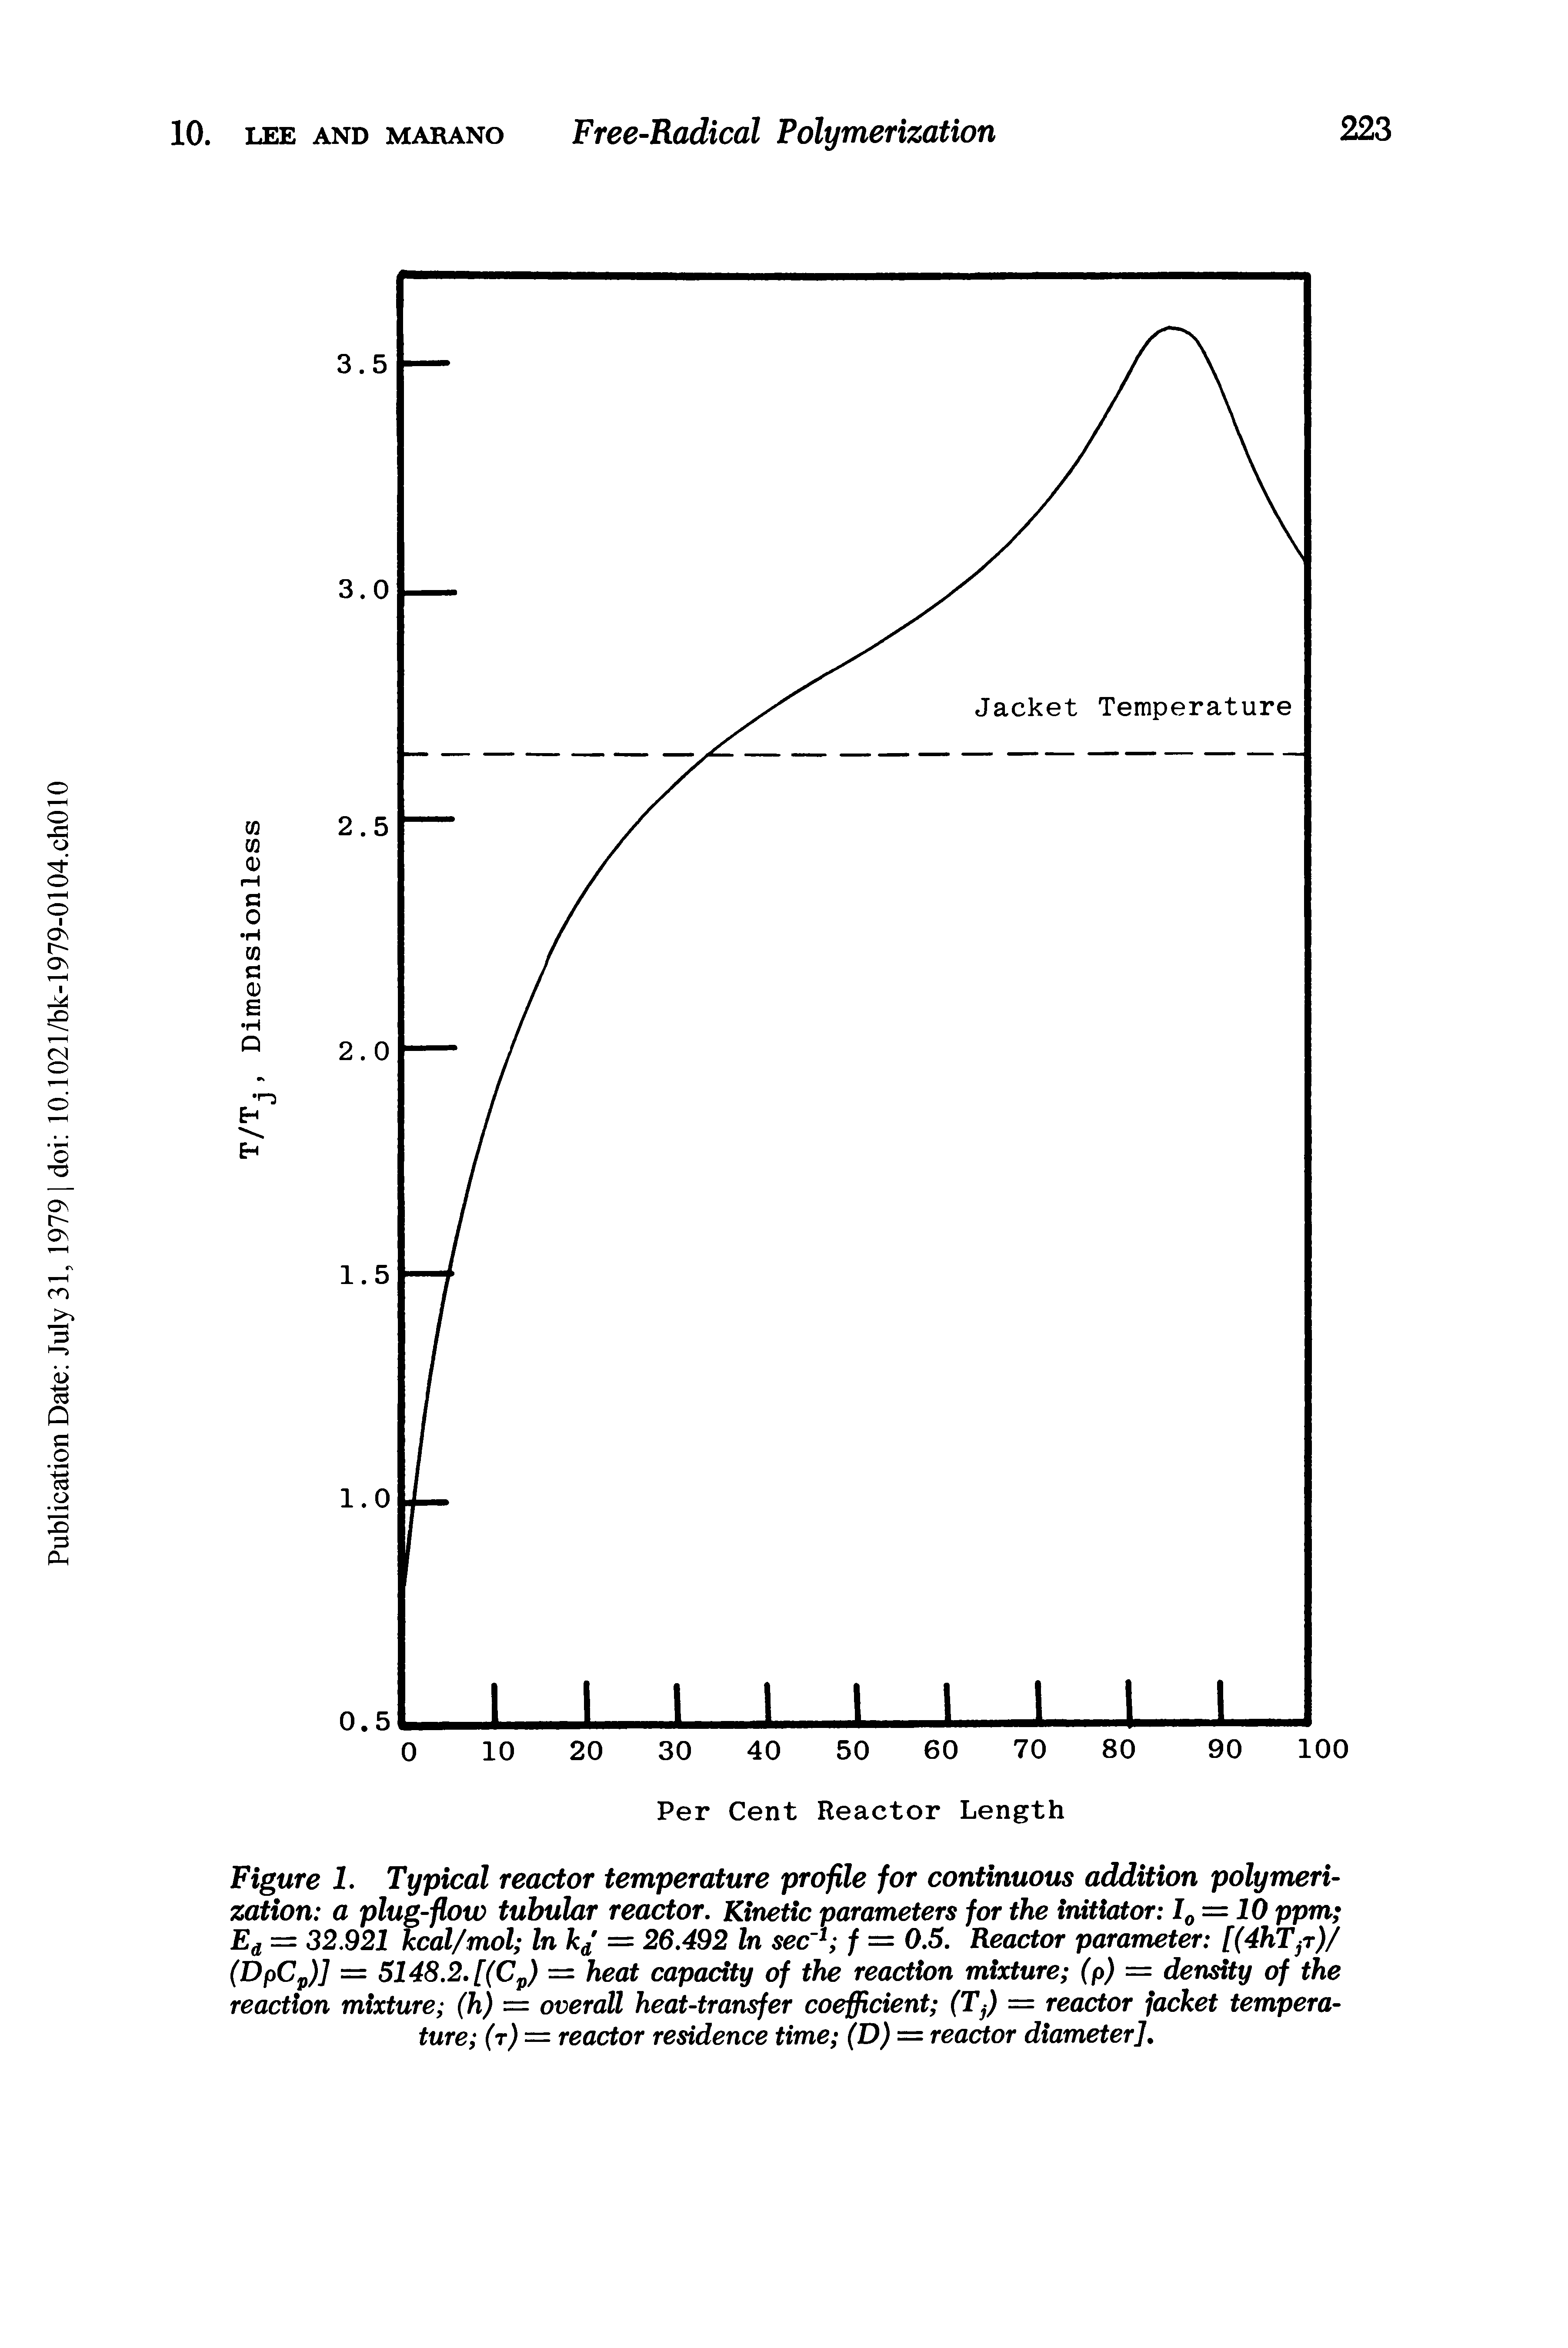 Figure 1. Typical reactor temperature profile for continuous addition polymerization a plug-flow tubular reactor. Kinetic parameters for the initiator 1 = 10 ppm Ea = 32.921 kcal/mol In = 26.492 In sec f = 0.5. Reactor parameter [(4hT r)/ (DpCp)] = 5148.2. [(Cp) = heat capacity of the reaction mixture (p) = density of the reaction mixture (h) = overall heat-transfer coefficient (Tf) = reactor jacket temperature (r) = reactor residence time (D) = reactor diameter].